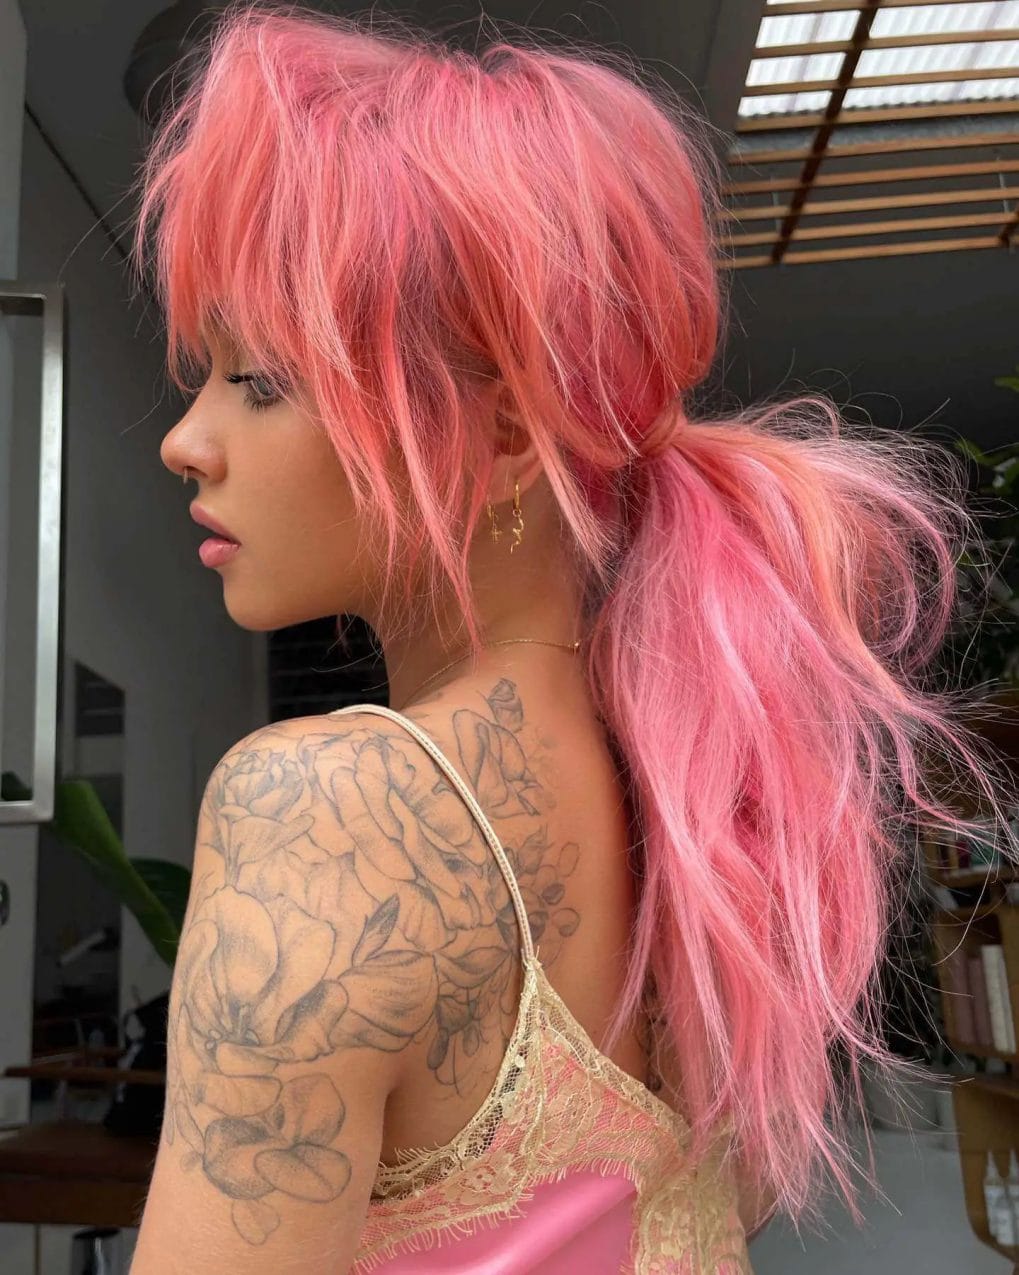 Tousled candy-pink ponytail with a cool, edgy vibe, complemented by rough choppy bangs.